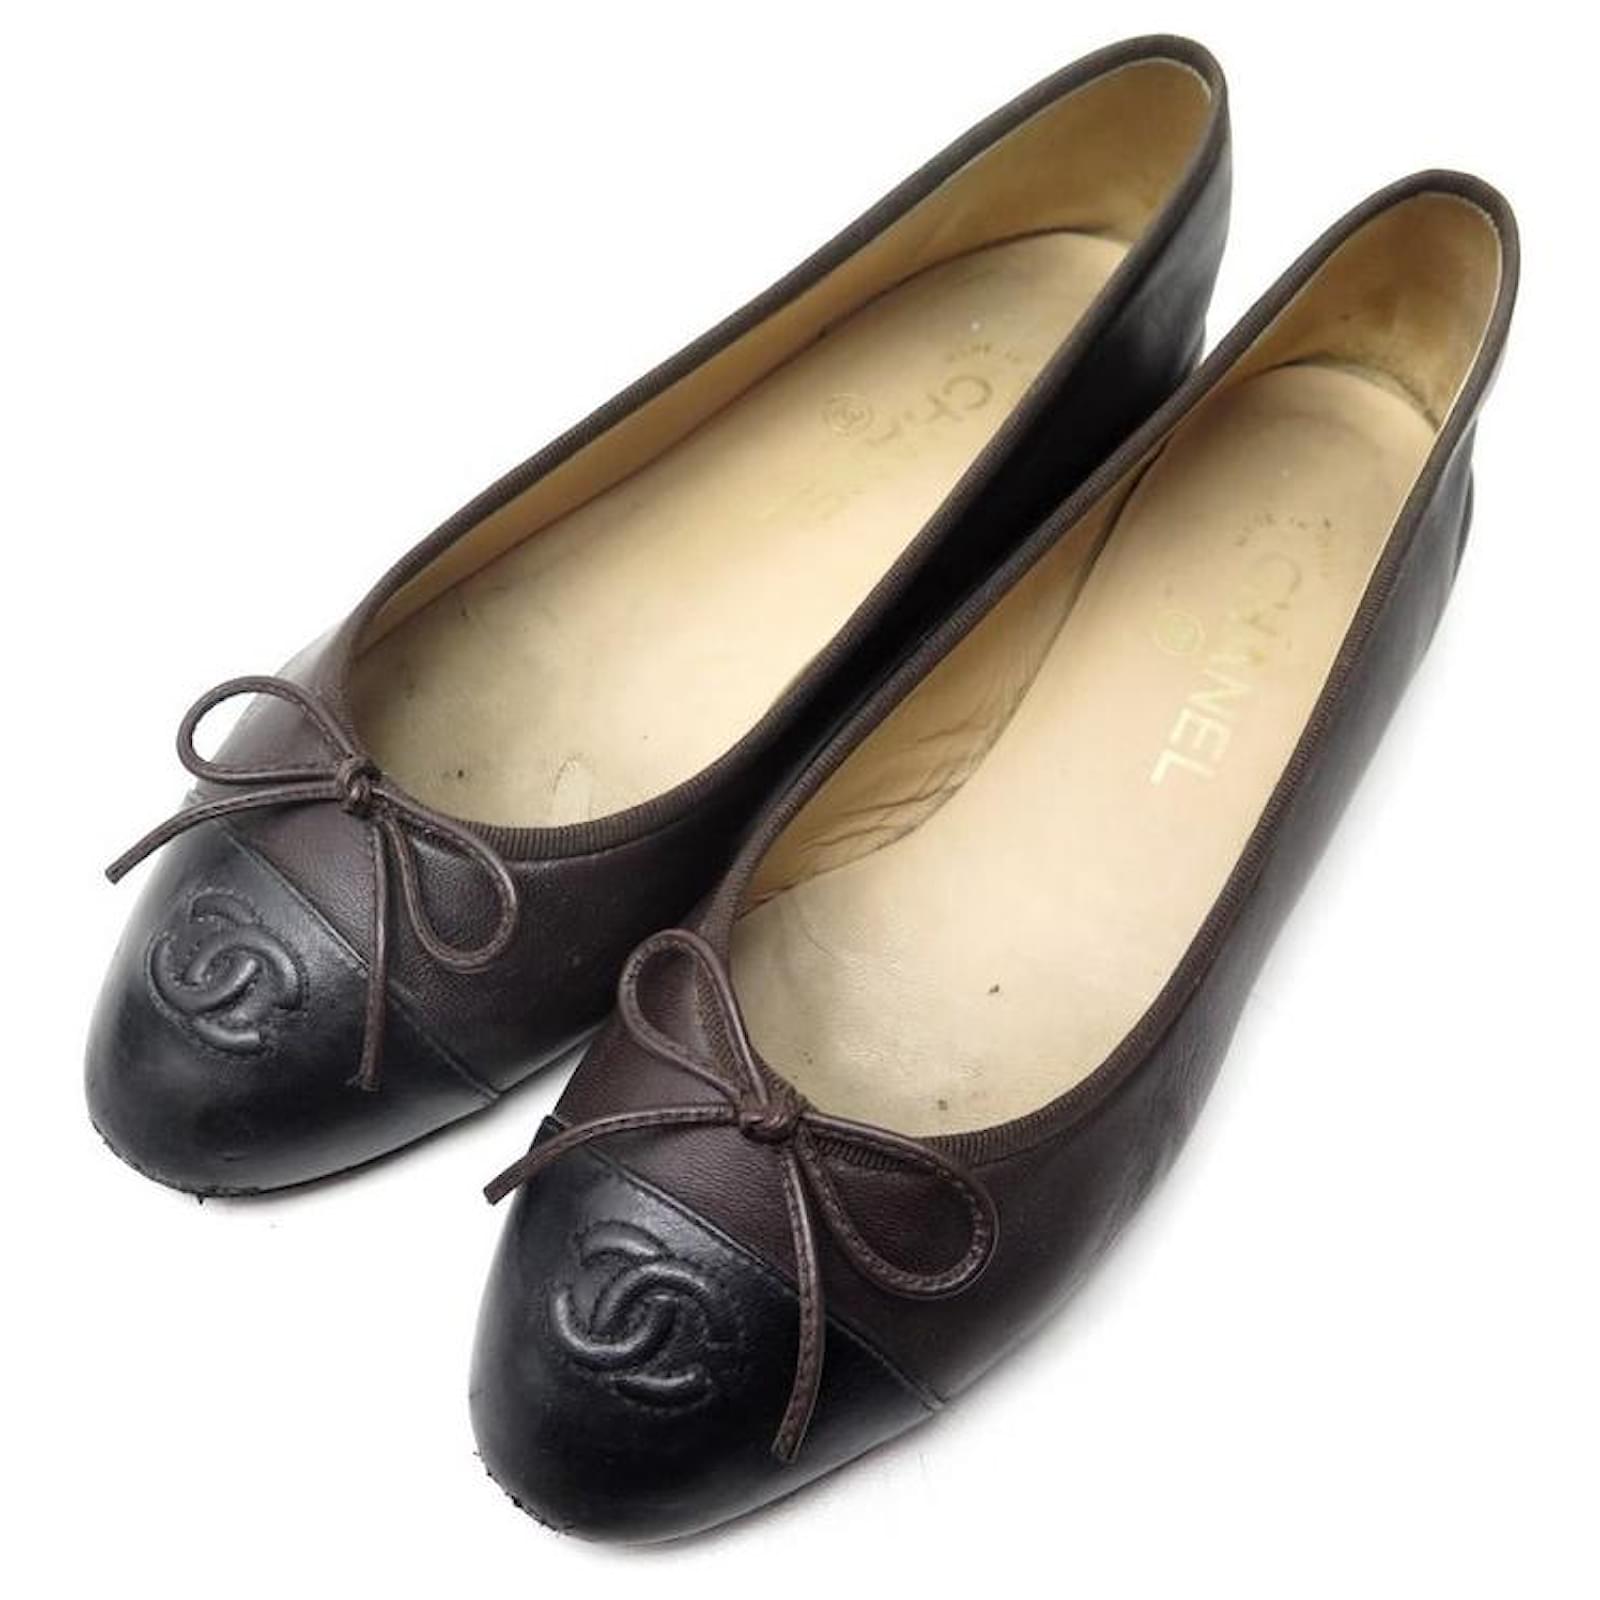 CHAUSSURES CHANEL BALLERINES LOGO CC A02819 39 CUIR MARRON LEATHER SHOES